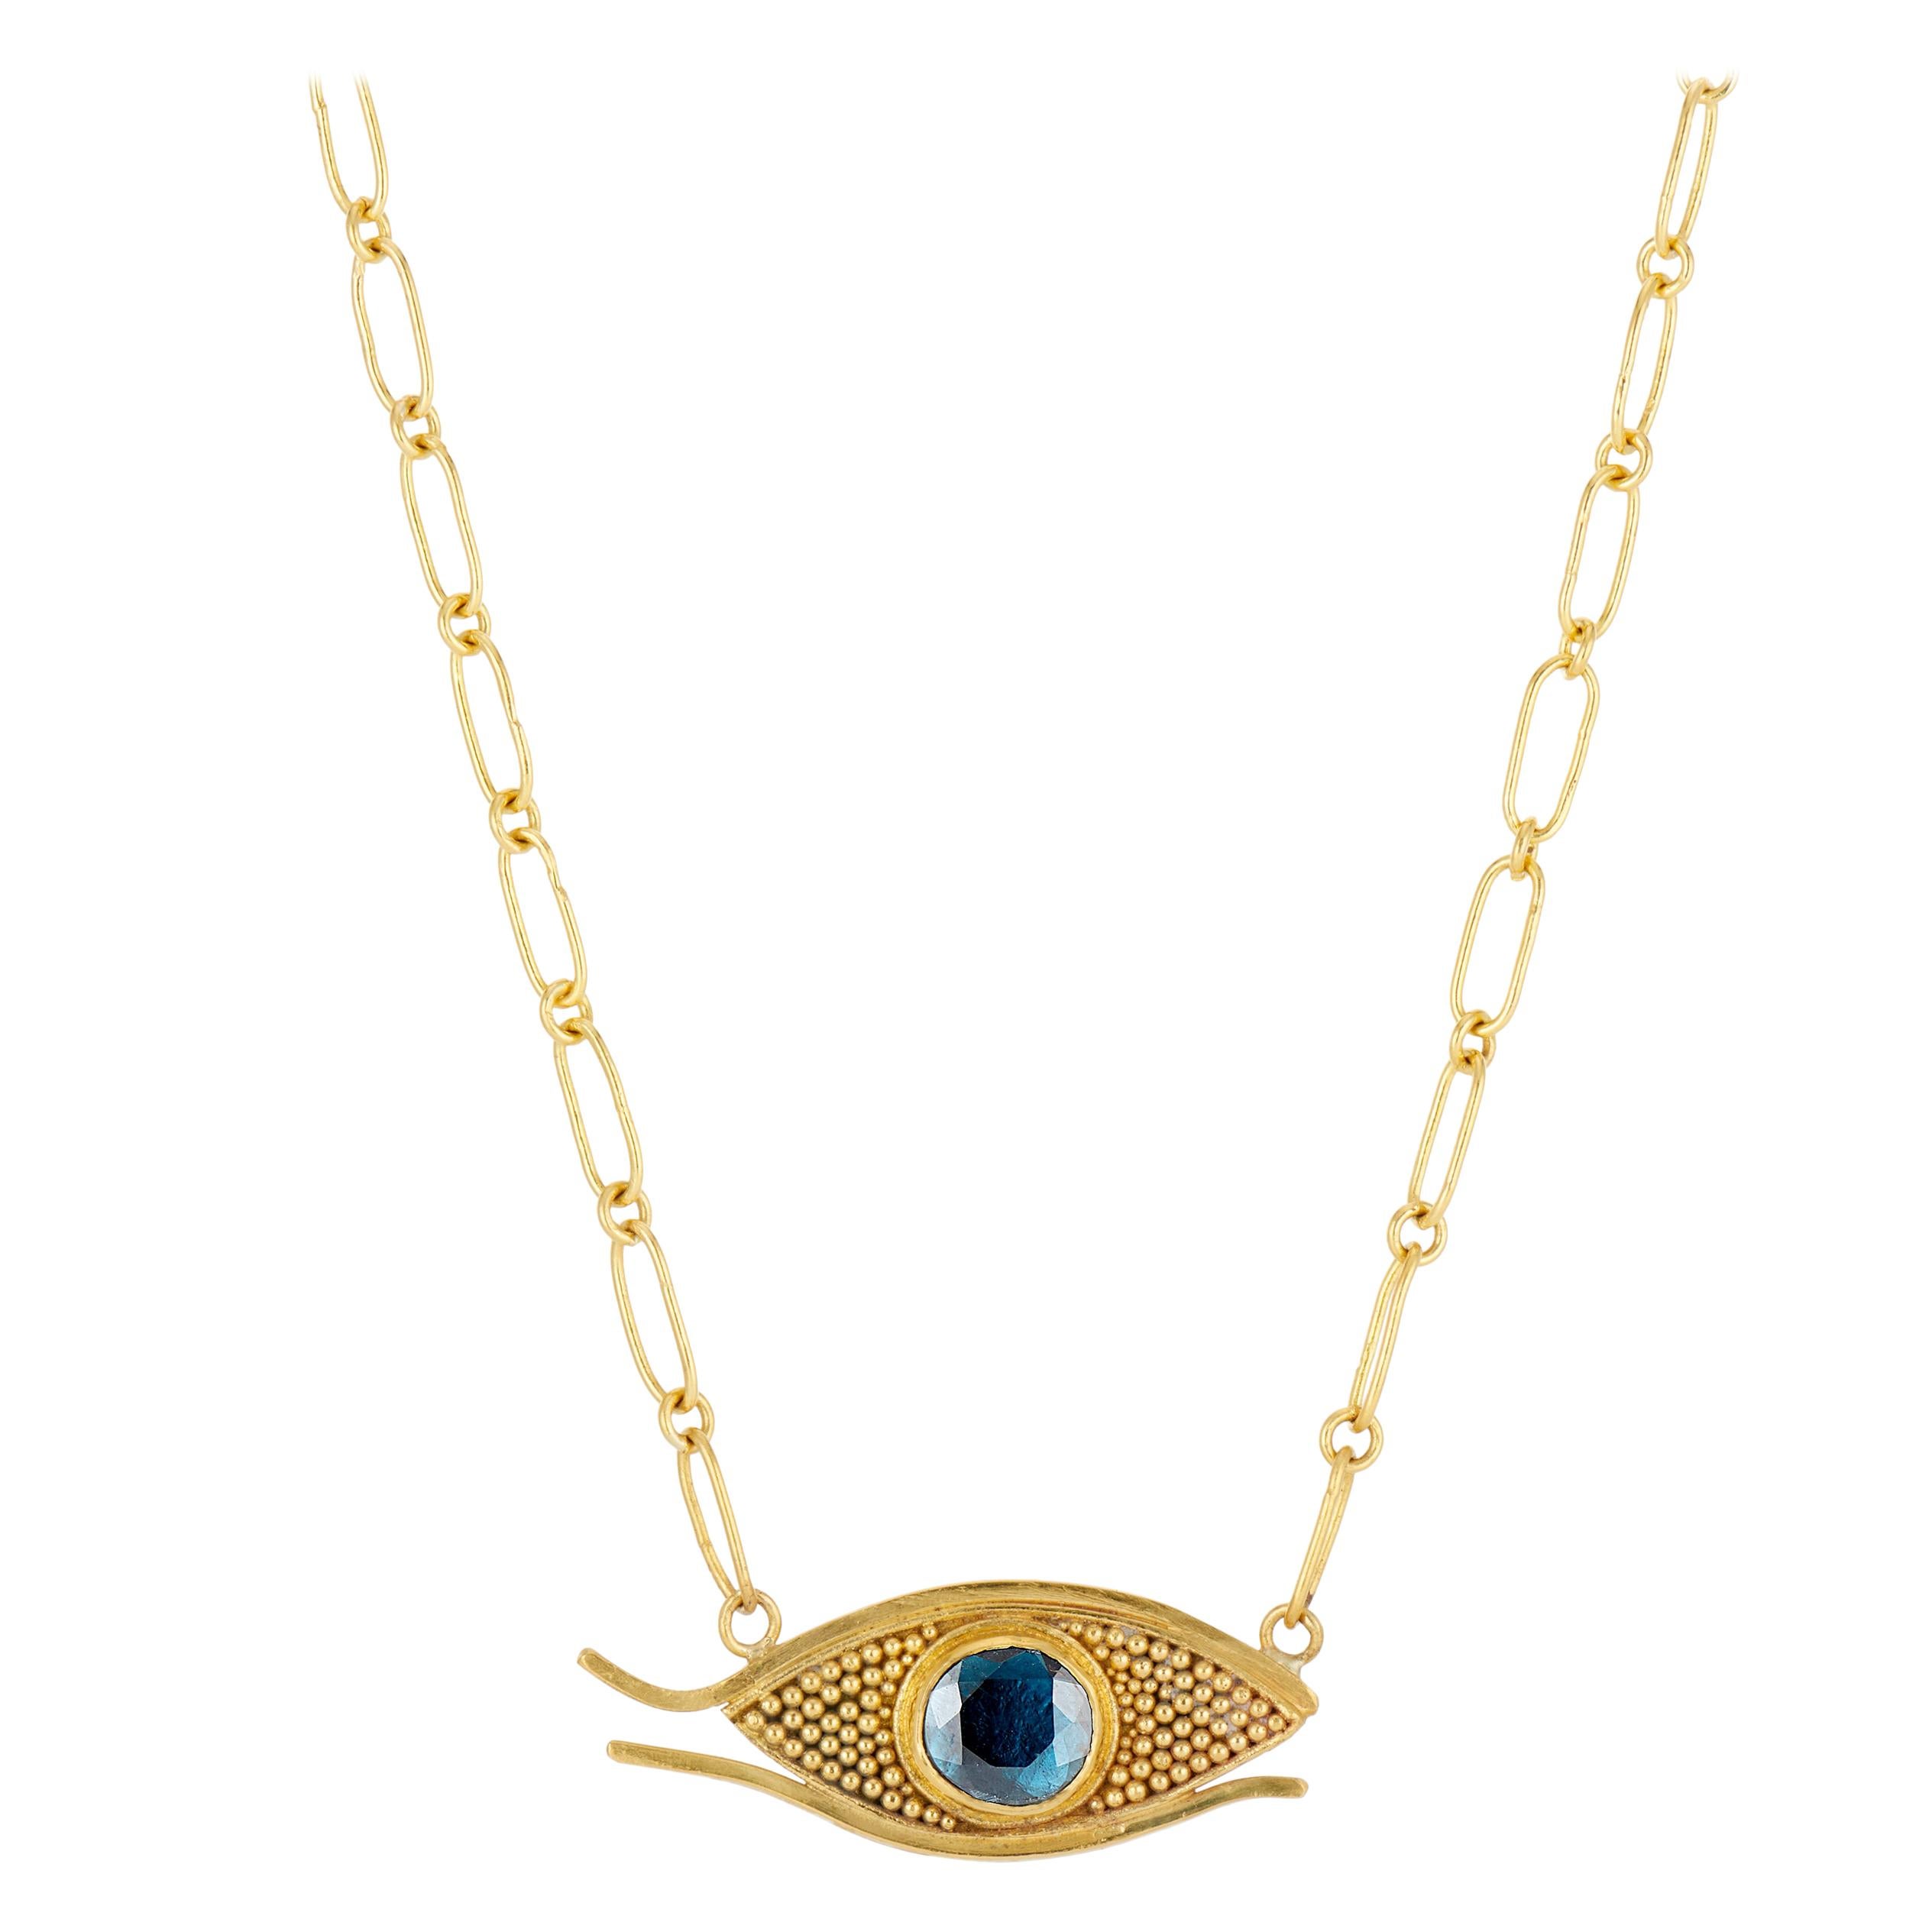 Egyptian Eye, Blue Rose Cut Spinel, Granulated Gold Pendant Chain Necklace 